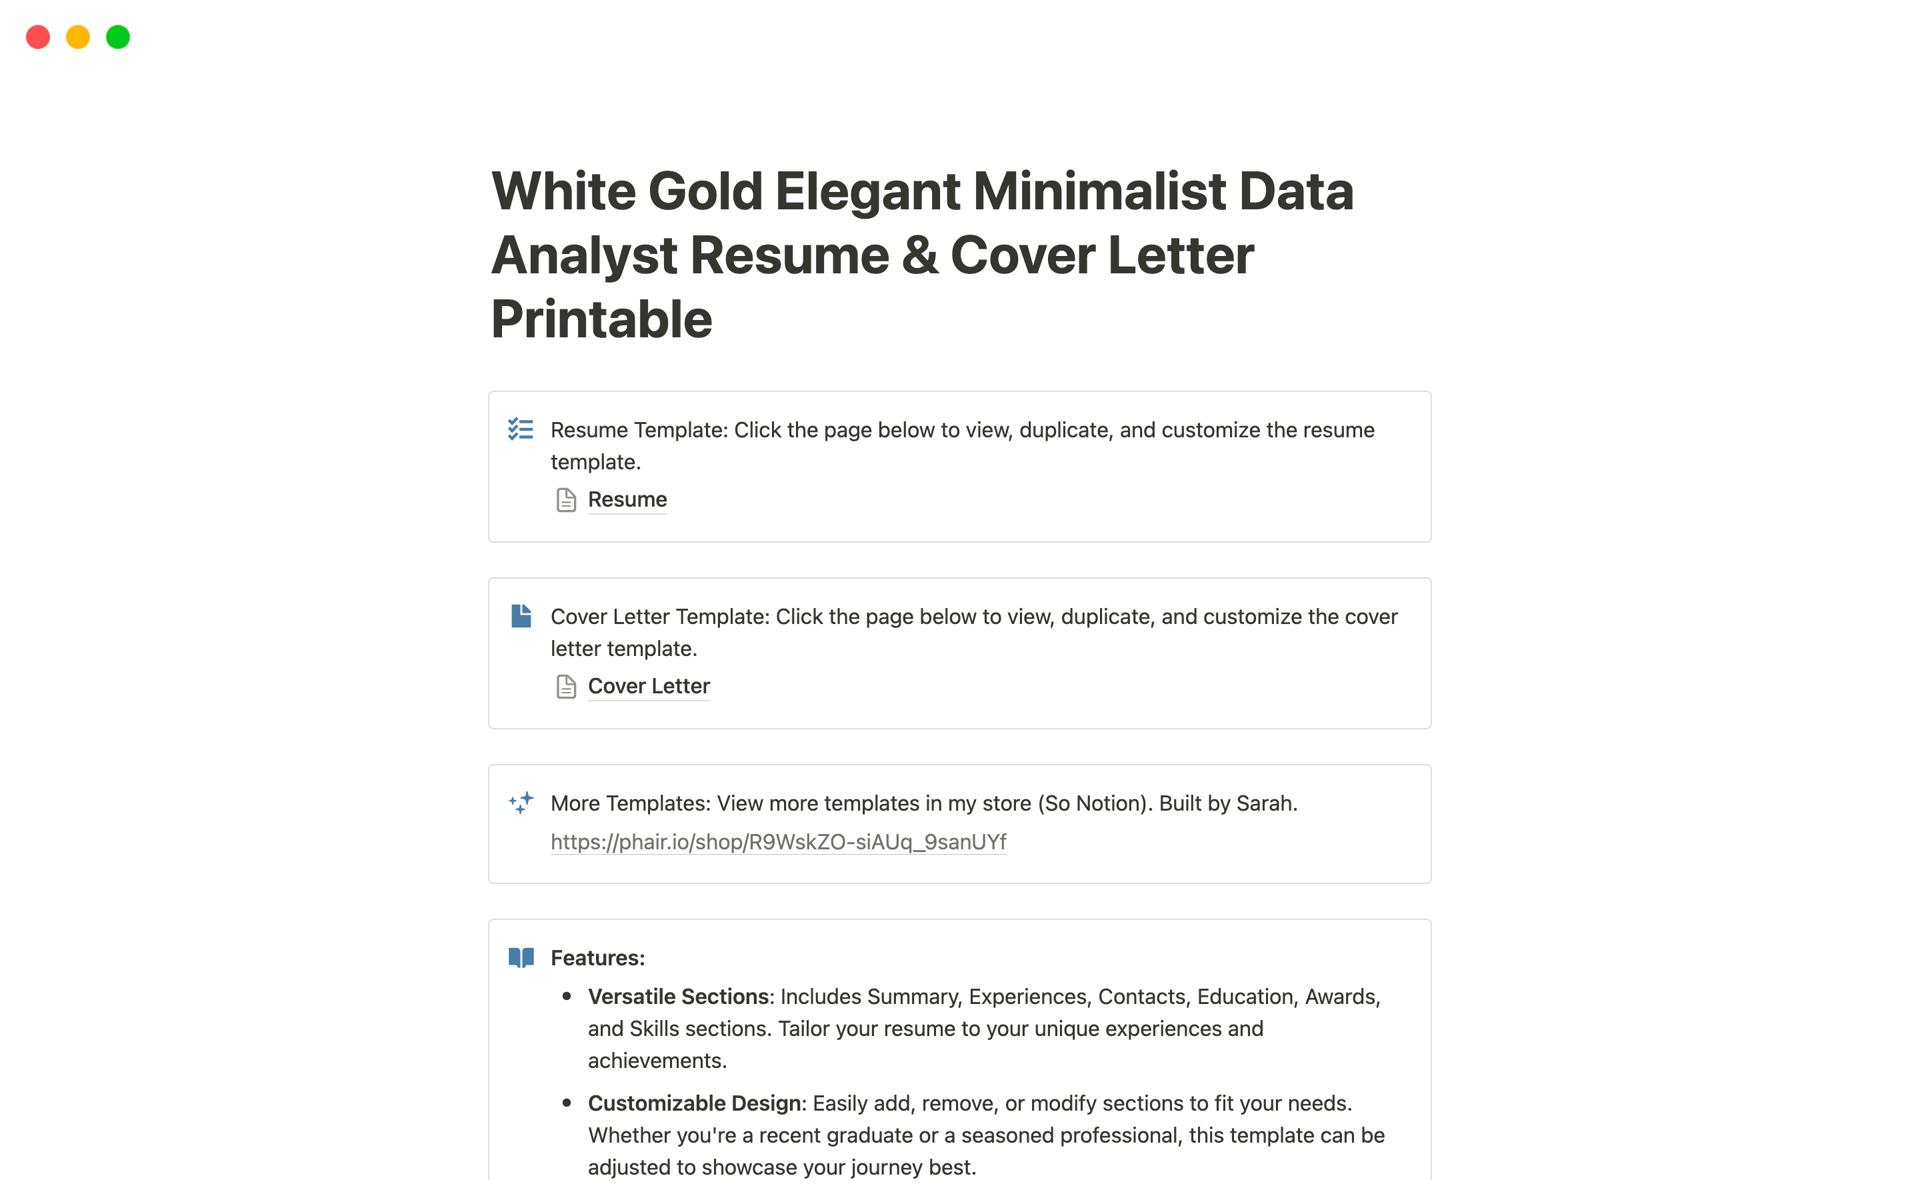 A template preview for Elegant Minimalist Resume & Cover Letter